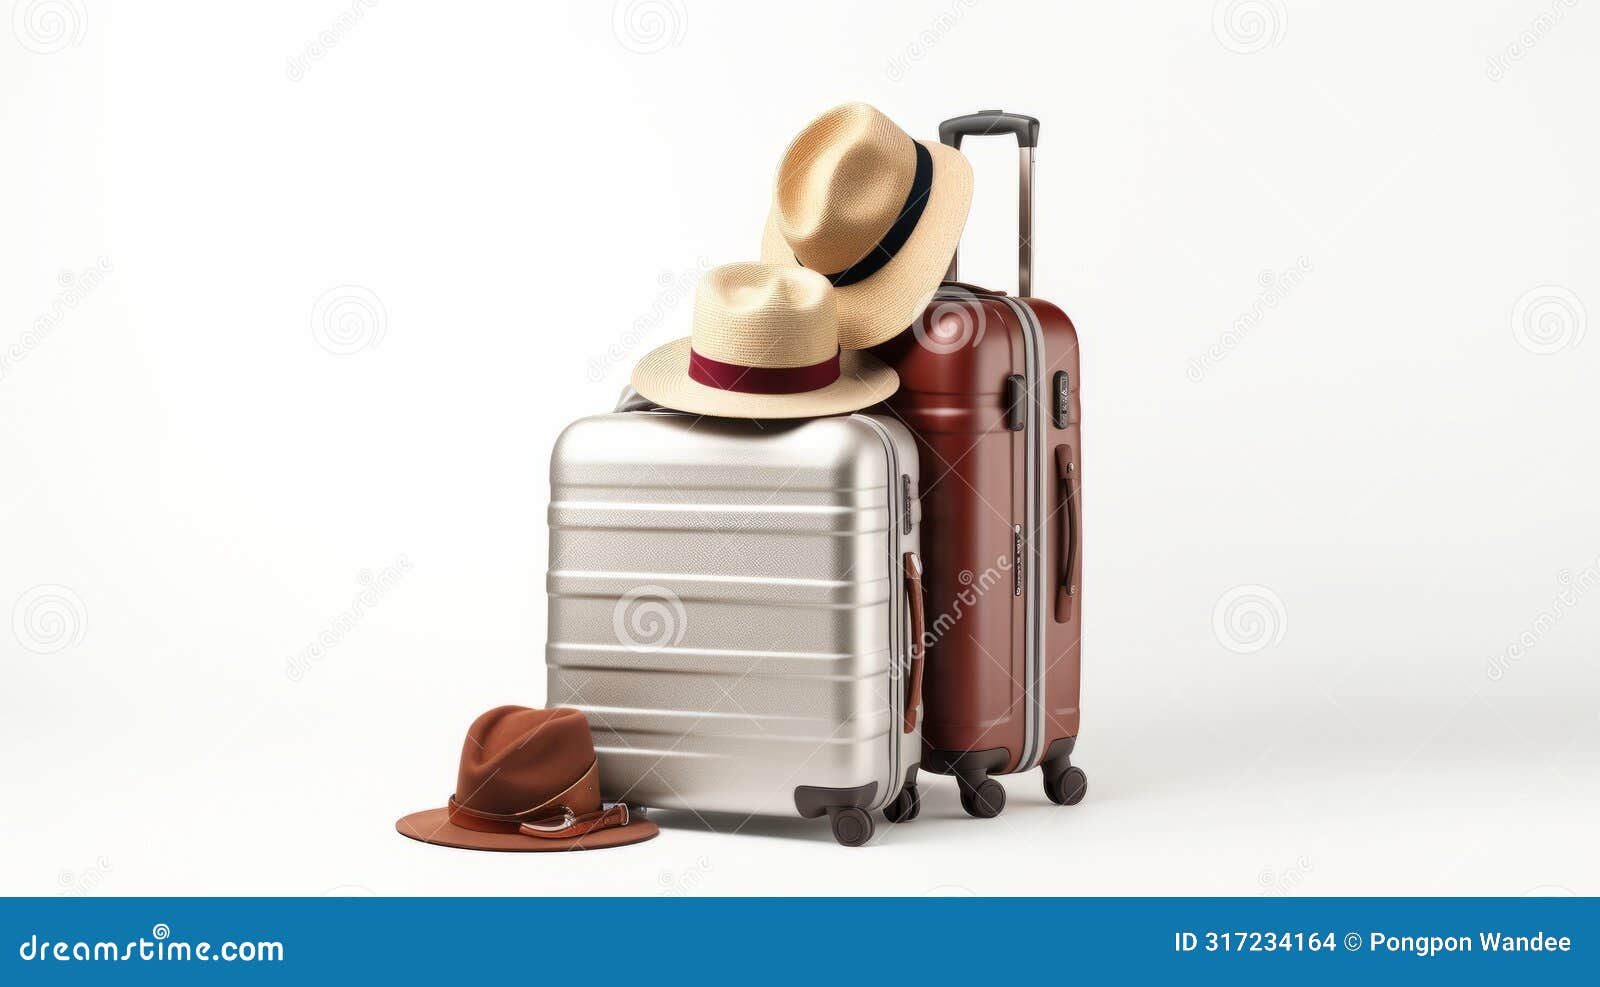 two suitcases, one silver, one brown, with hats, e against a white backdrop